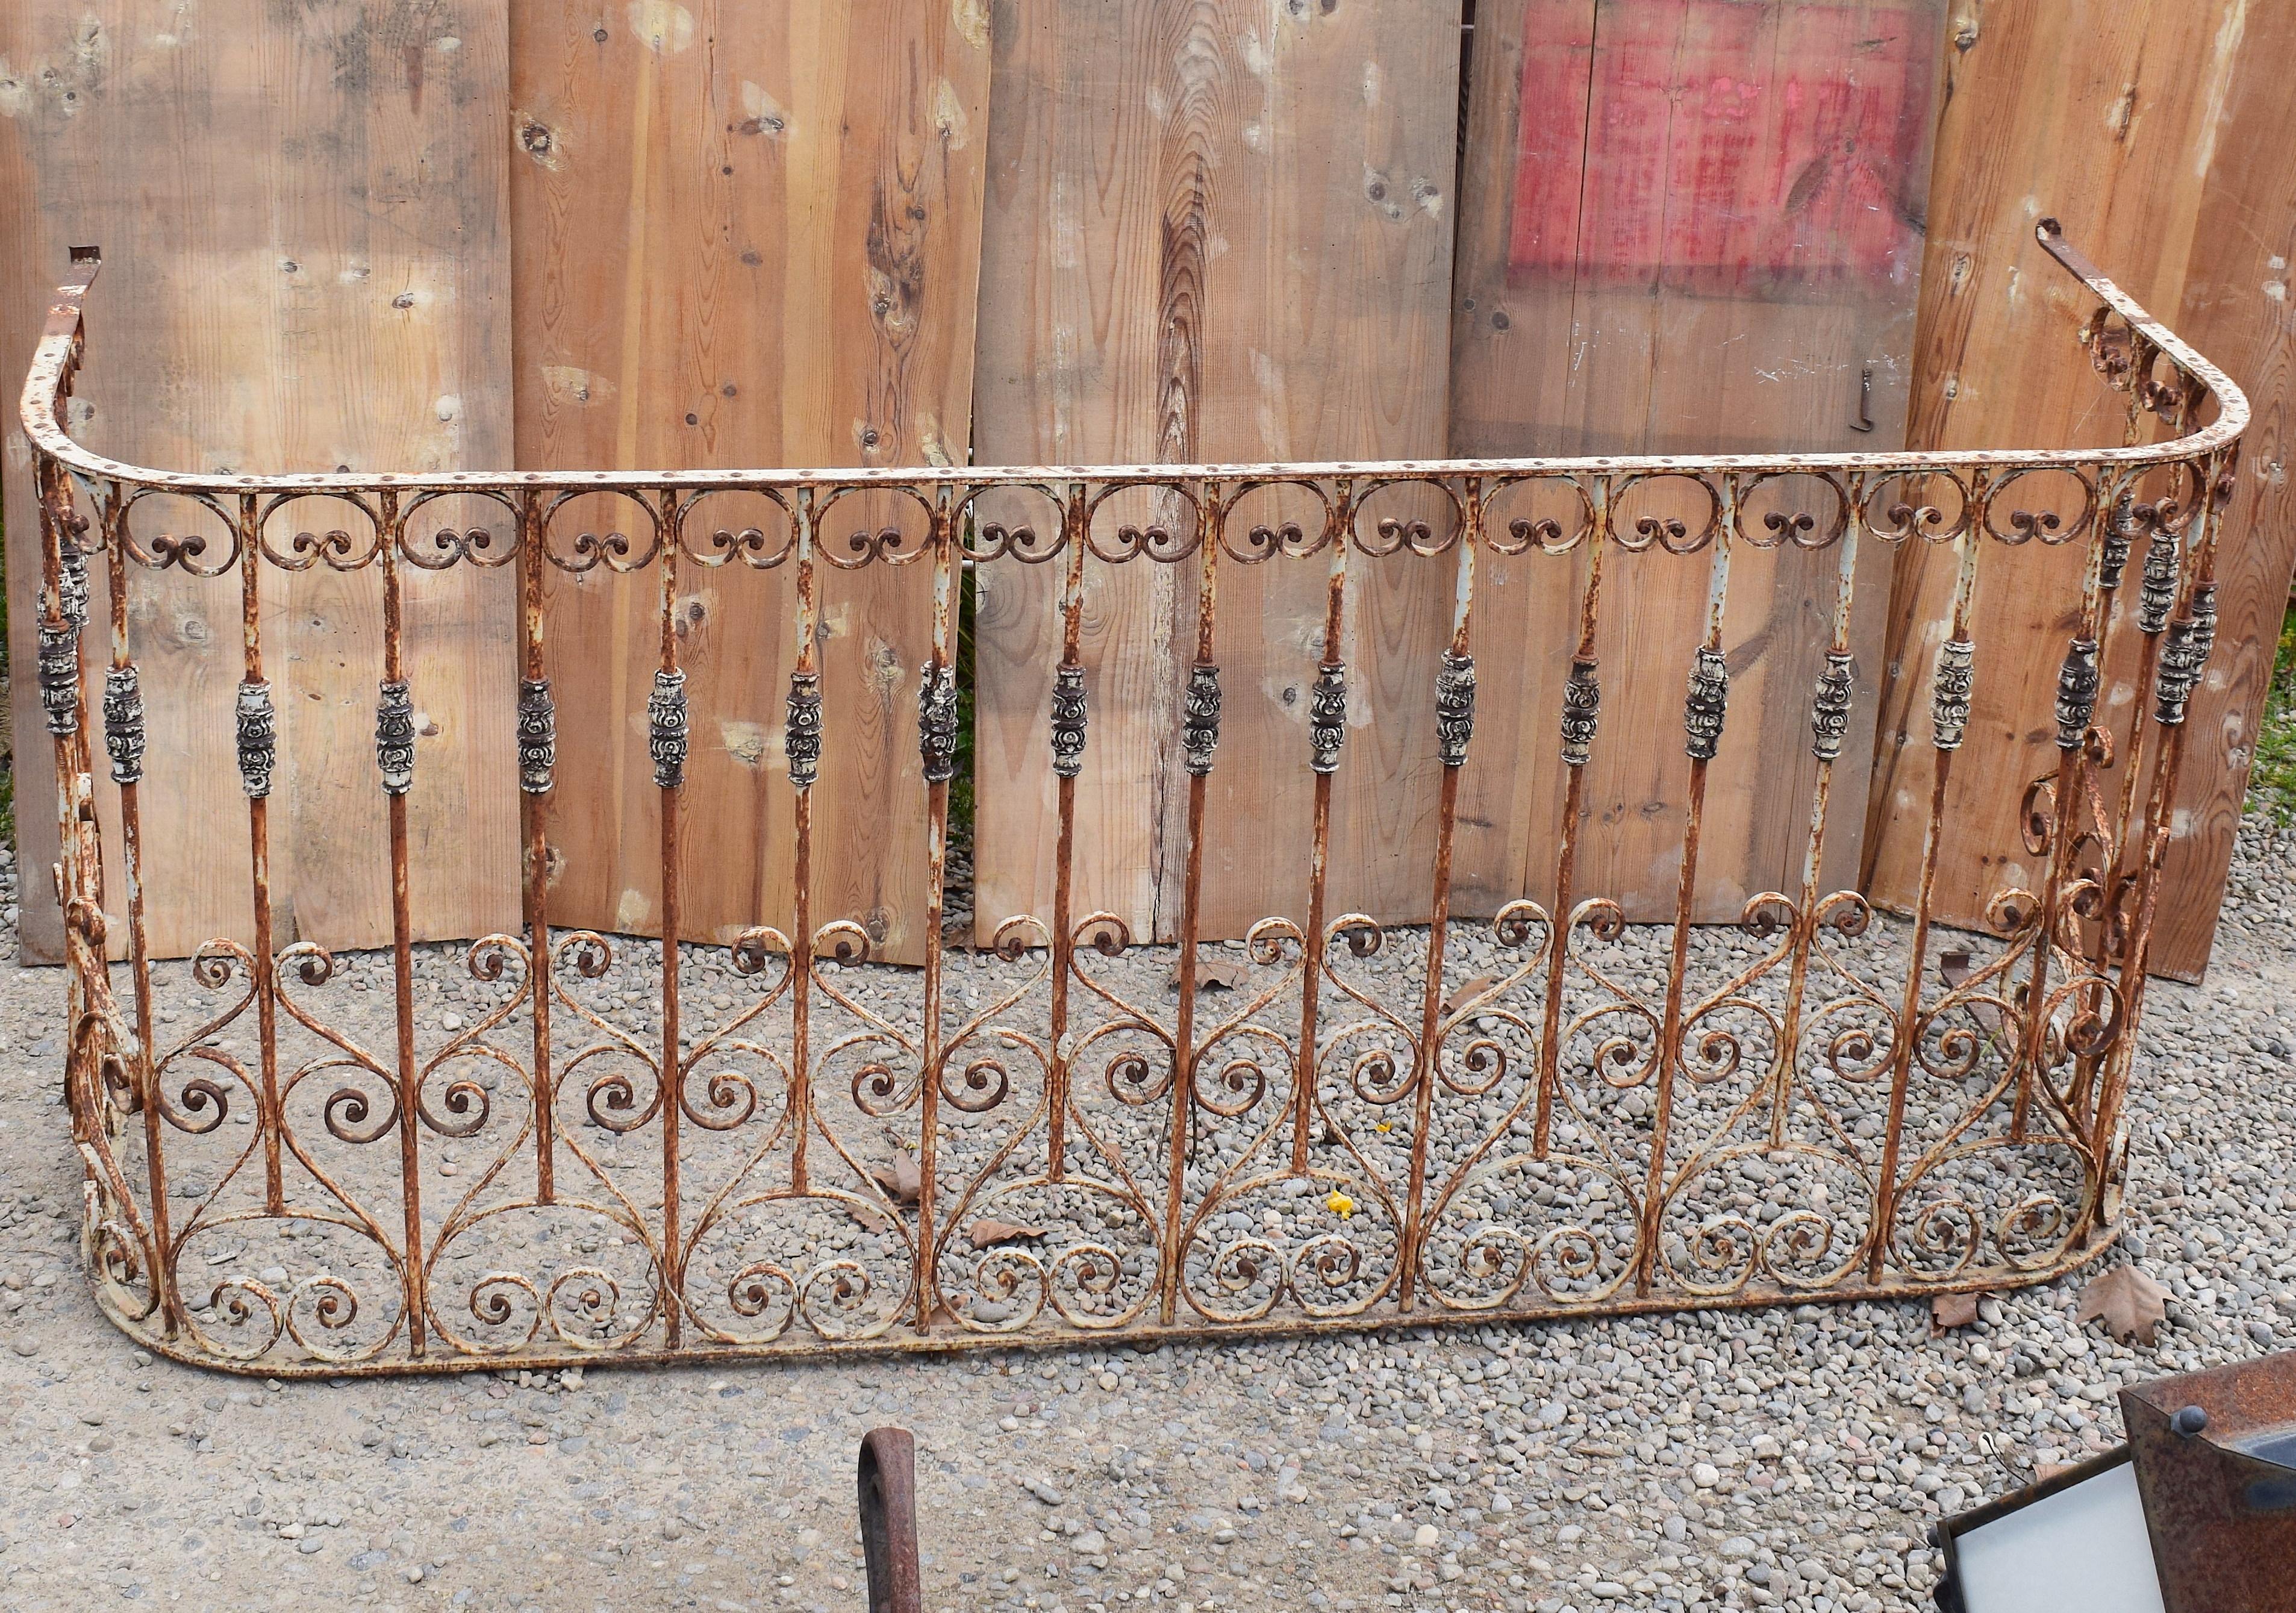 19th century French fence railing from a balcony section constructed from wrought iron. It is beautifully handcrafted with twisted, scrolled decoration and heart motifs. The iron still retains much of the old lacquer finish in layers of white and